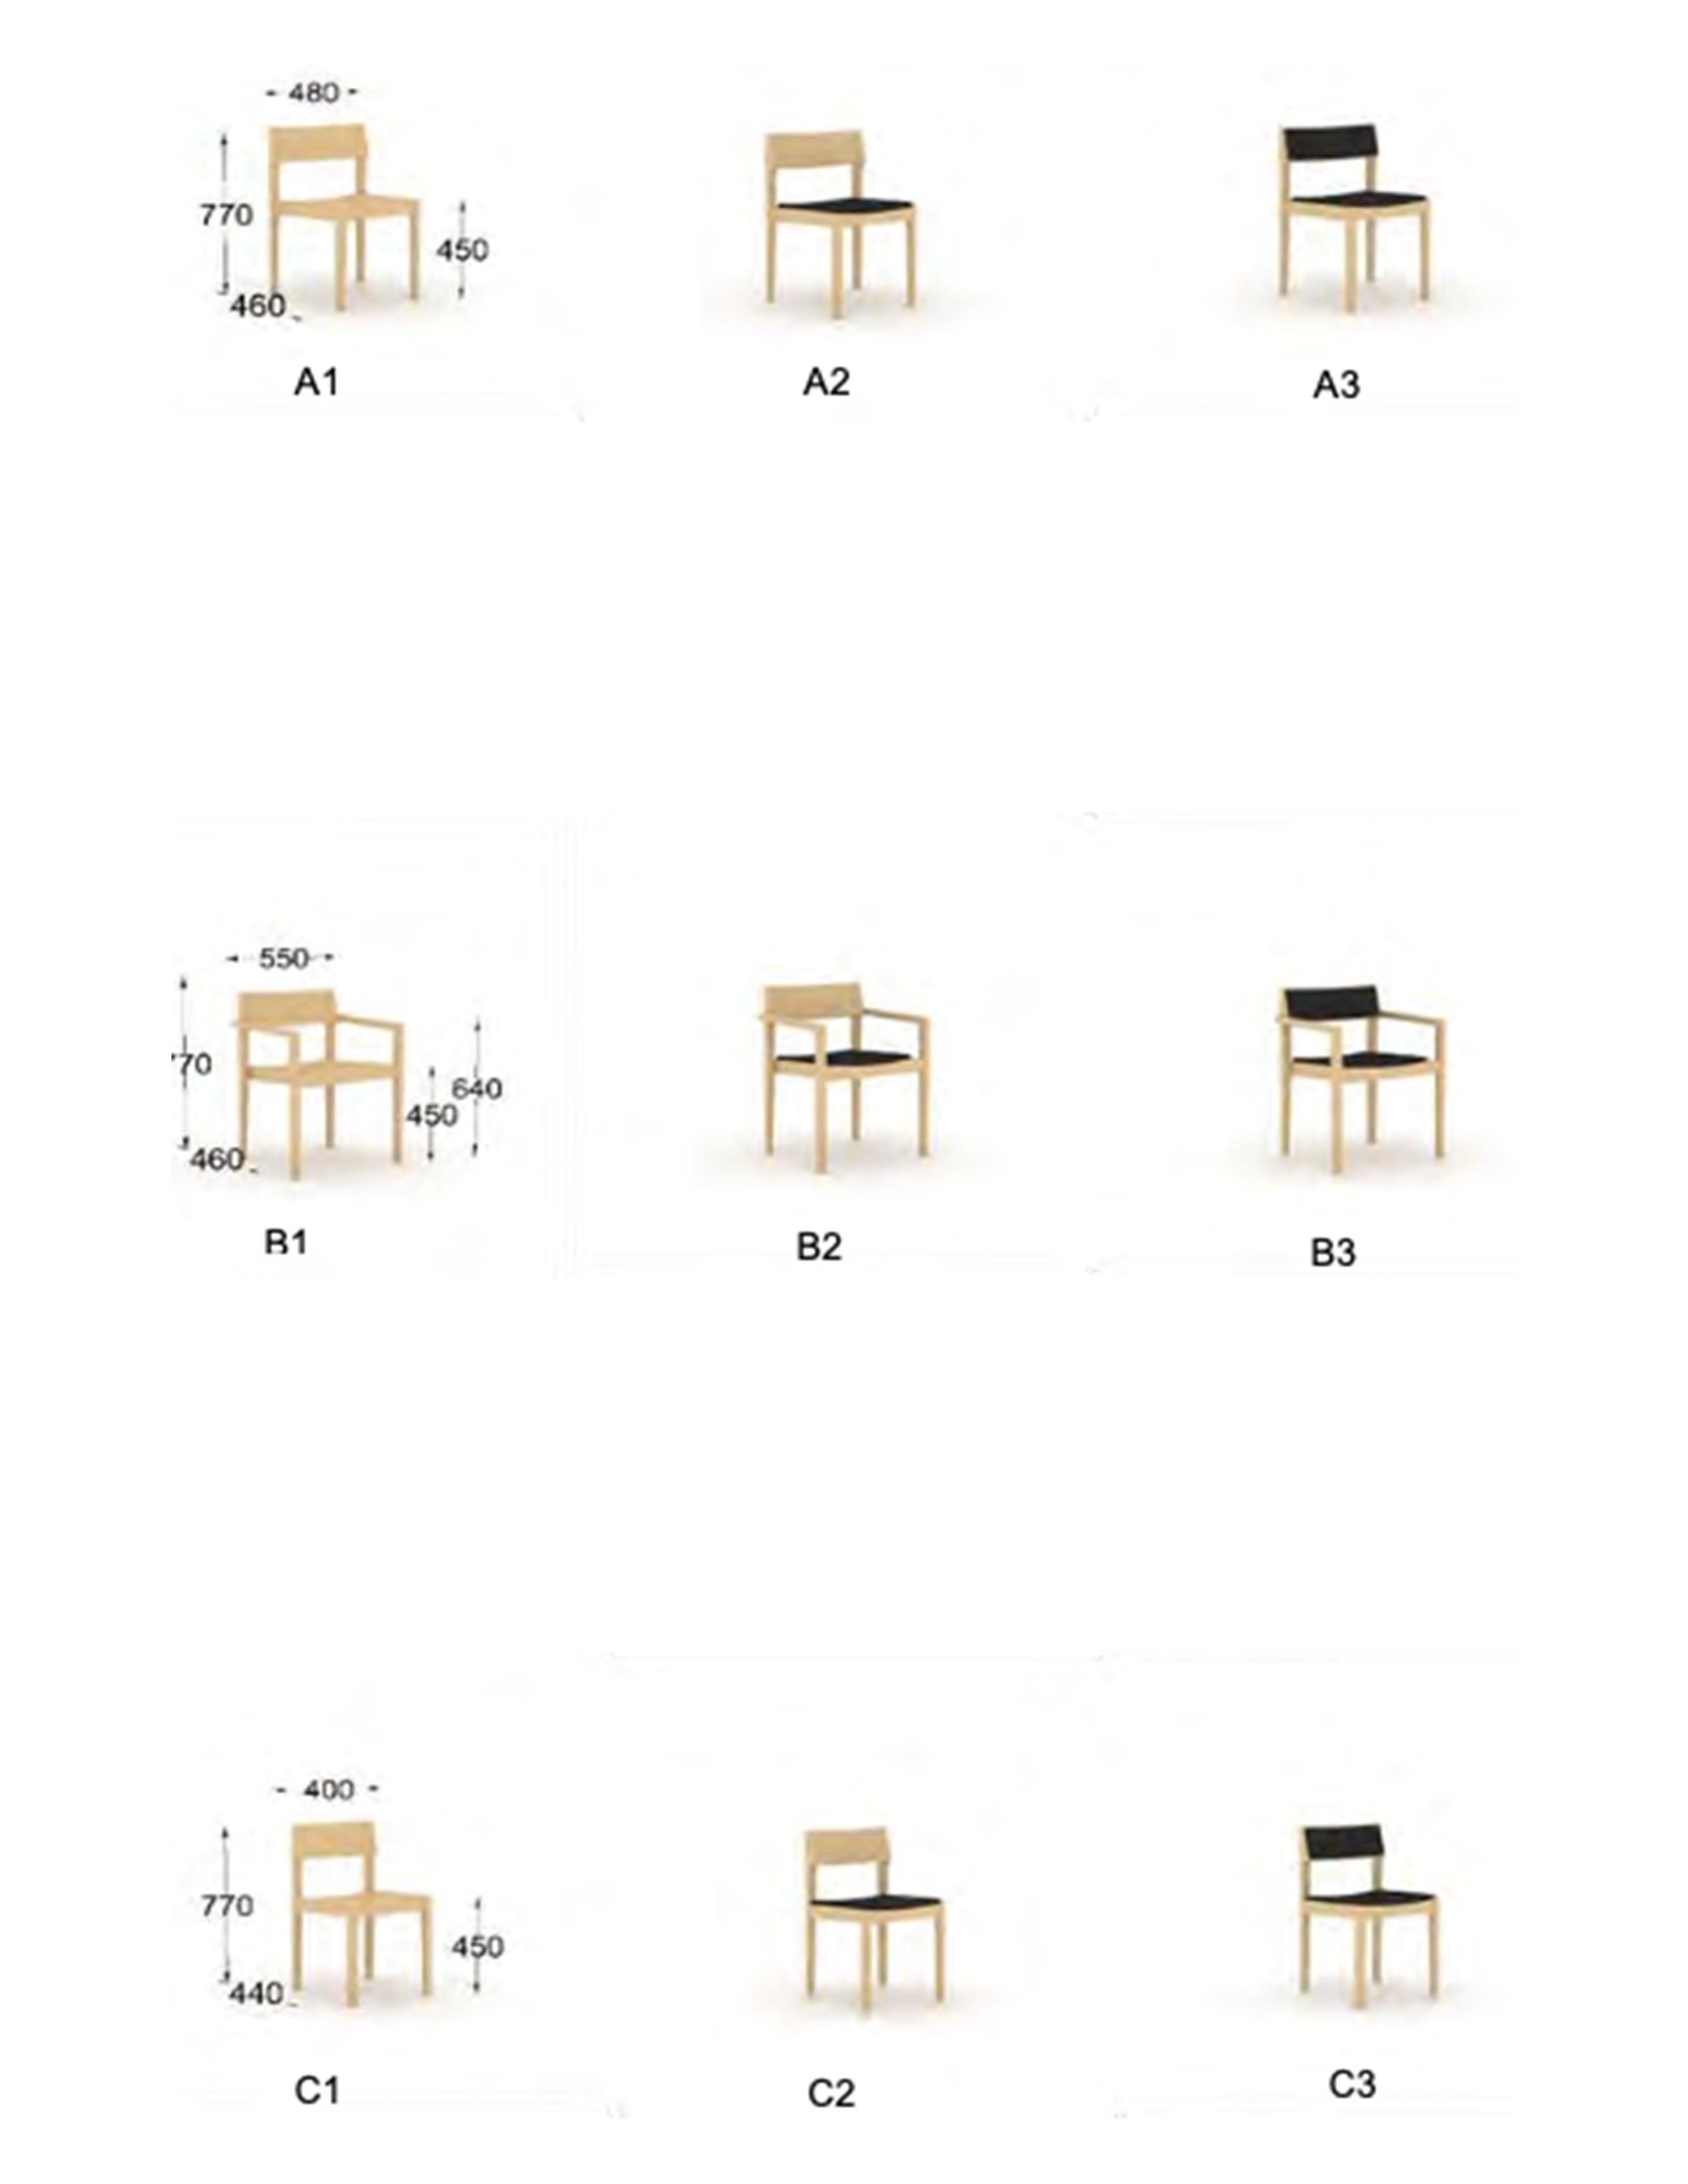 Finnish Customizable Inno Intro Stackable Wood Chair by Ari Kanerva For Sale